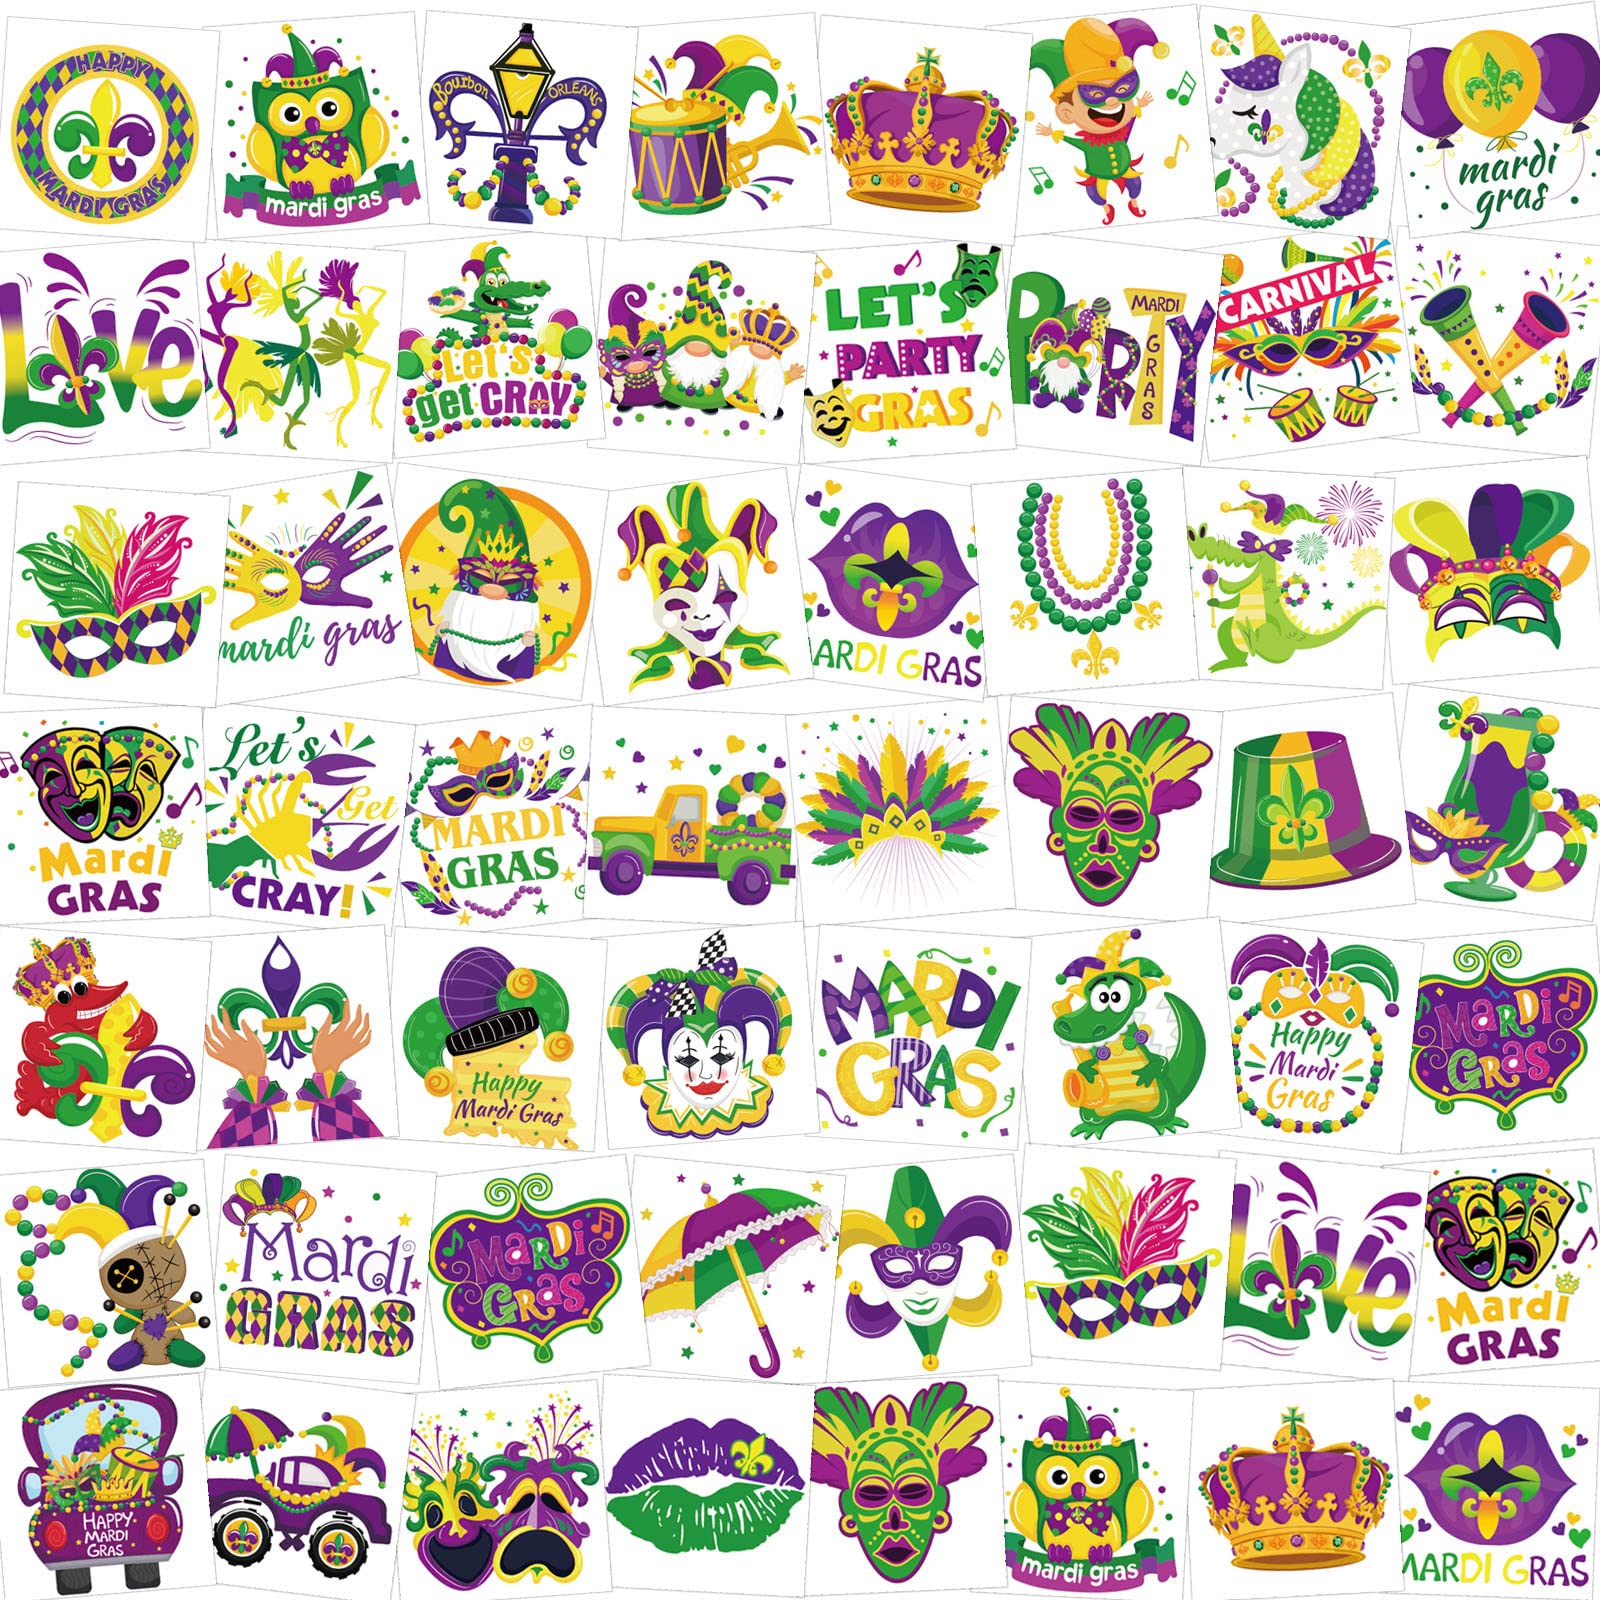 HOWAF 96 Pieces Mardi Gras Temporary Tattoos, 48 Styles New Orleans Party Temporary Tattoos Stickers for Kid, Mardi Gras Themed Fake Tattoos with Crown, Mask Design for Masquerade Party Decoration